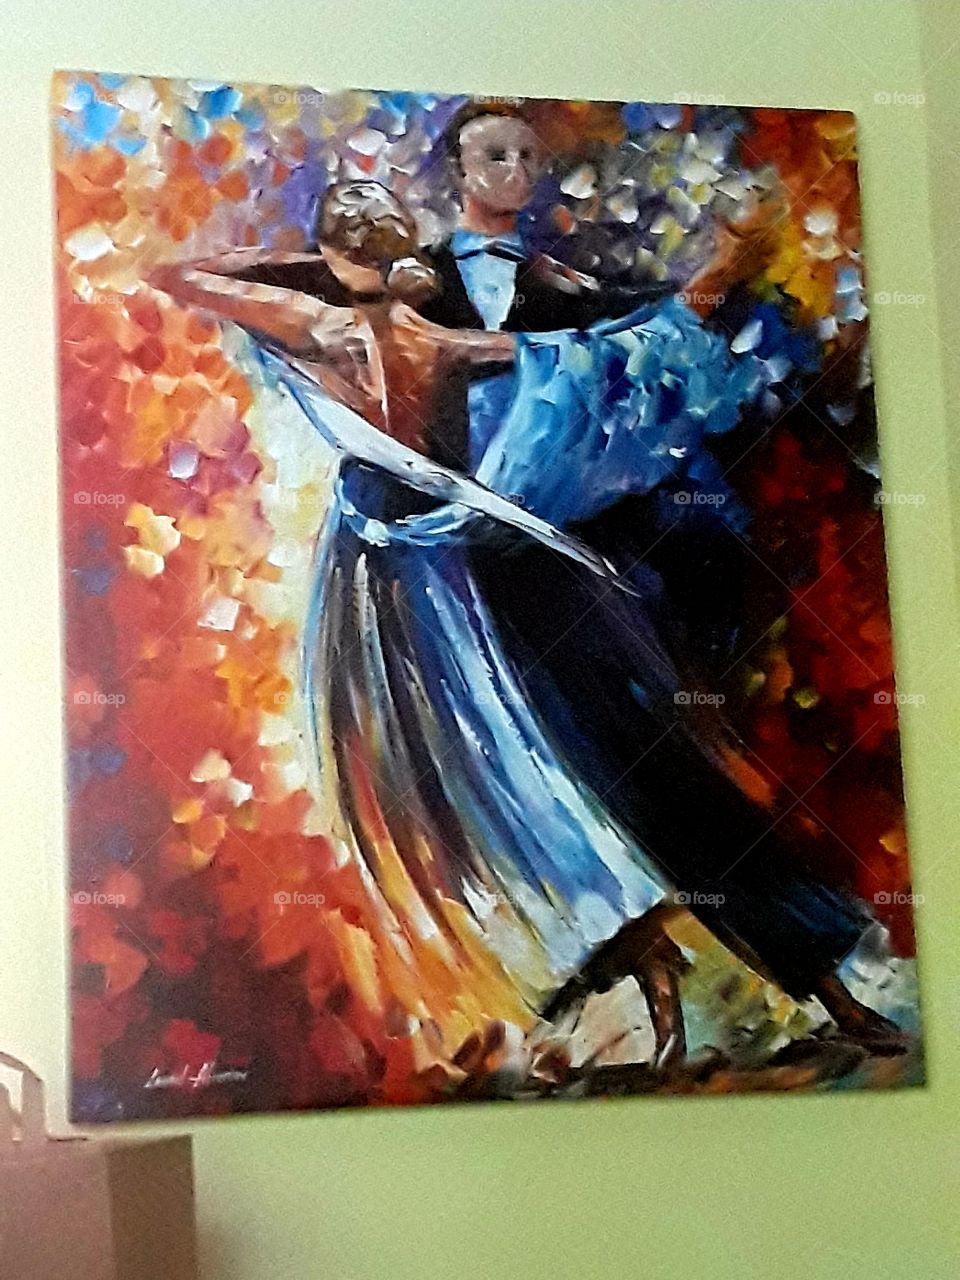 Beautiful original oil painting of a dancing couple. Painted on canvas by Leonid Afremov. Photo taken in my kitchen and dining room.